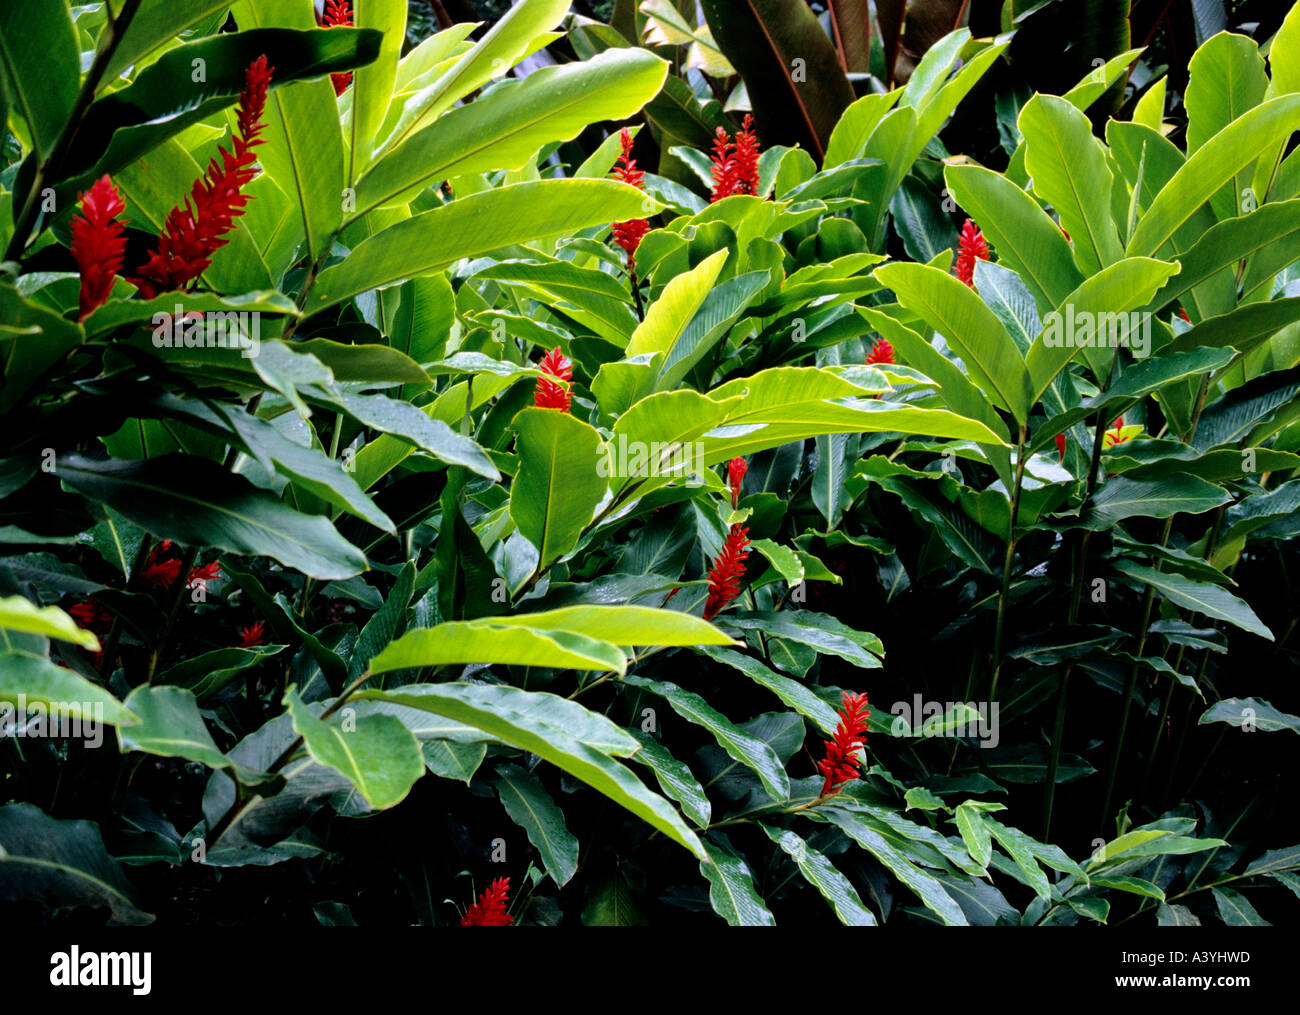 leaves and blossoms of herb and medicinal plant red ginger Alpinia purpurata state of hawaii usa Stock Photo